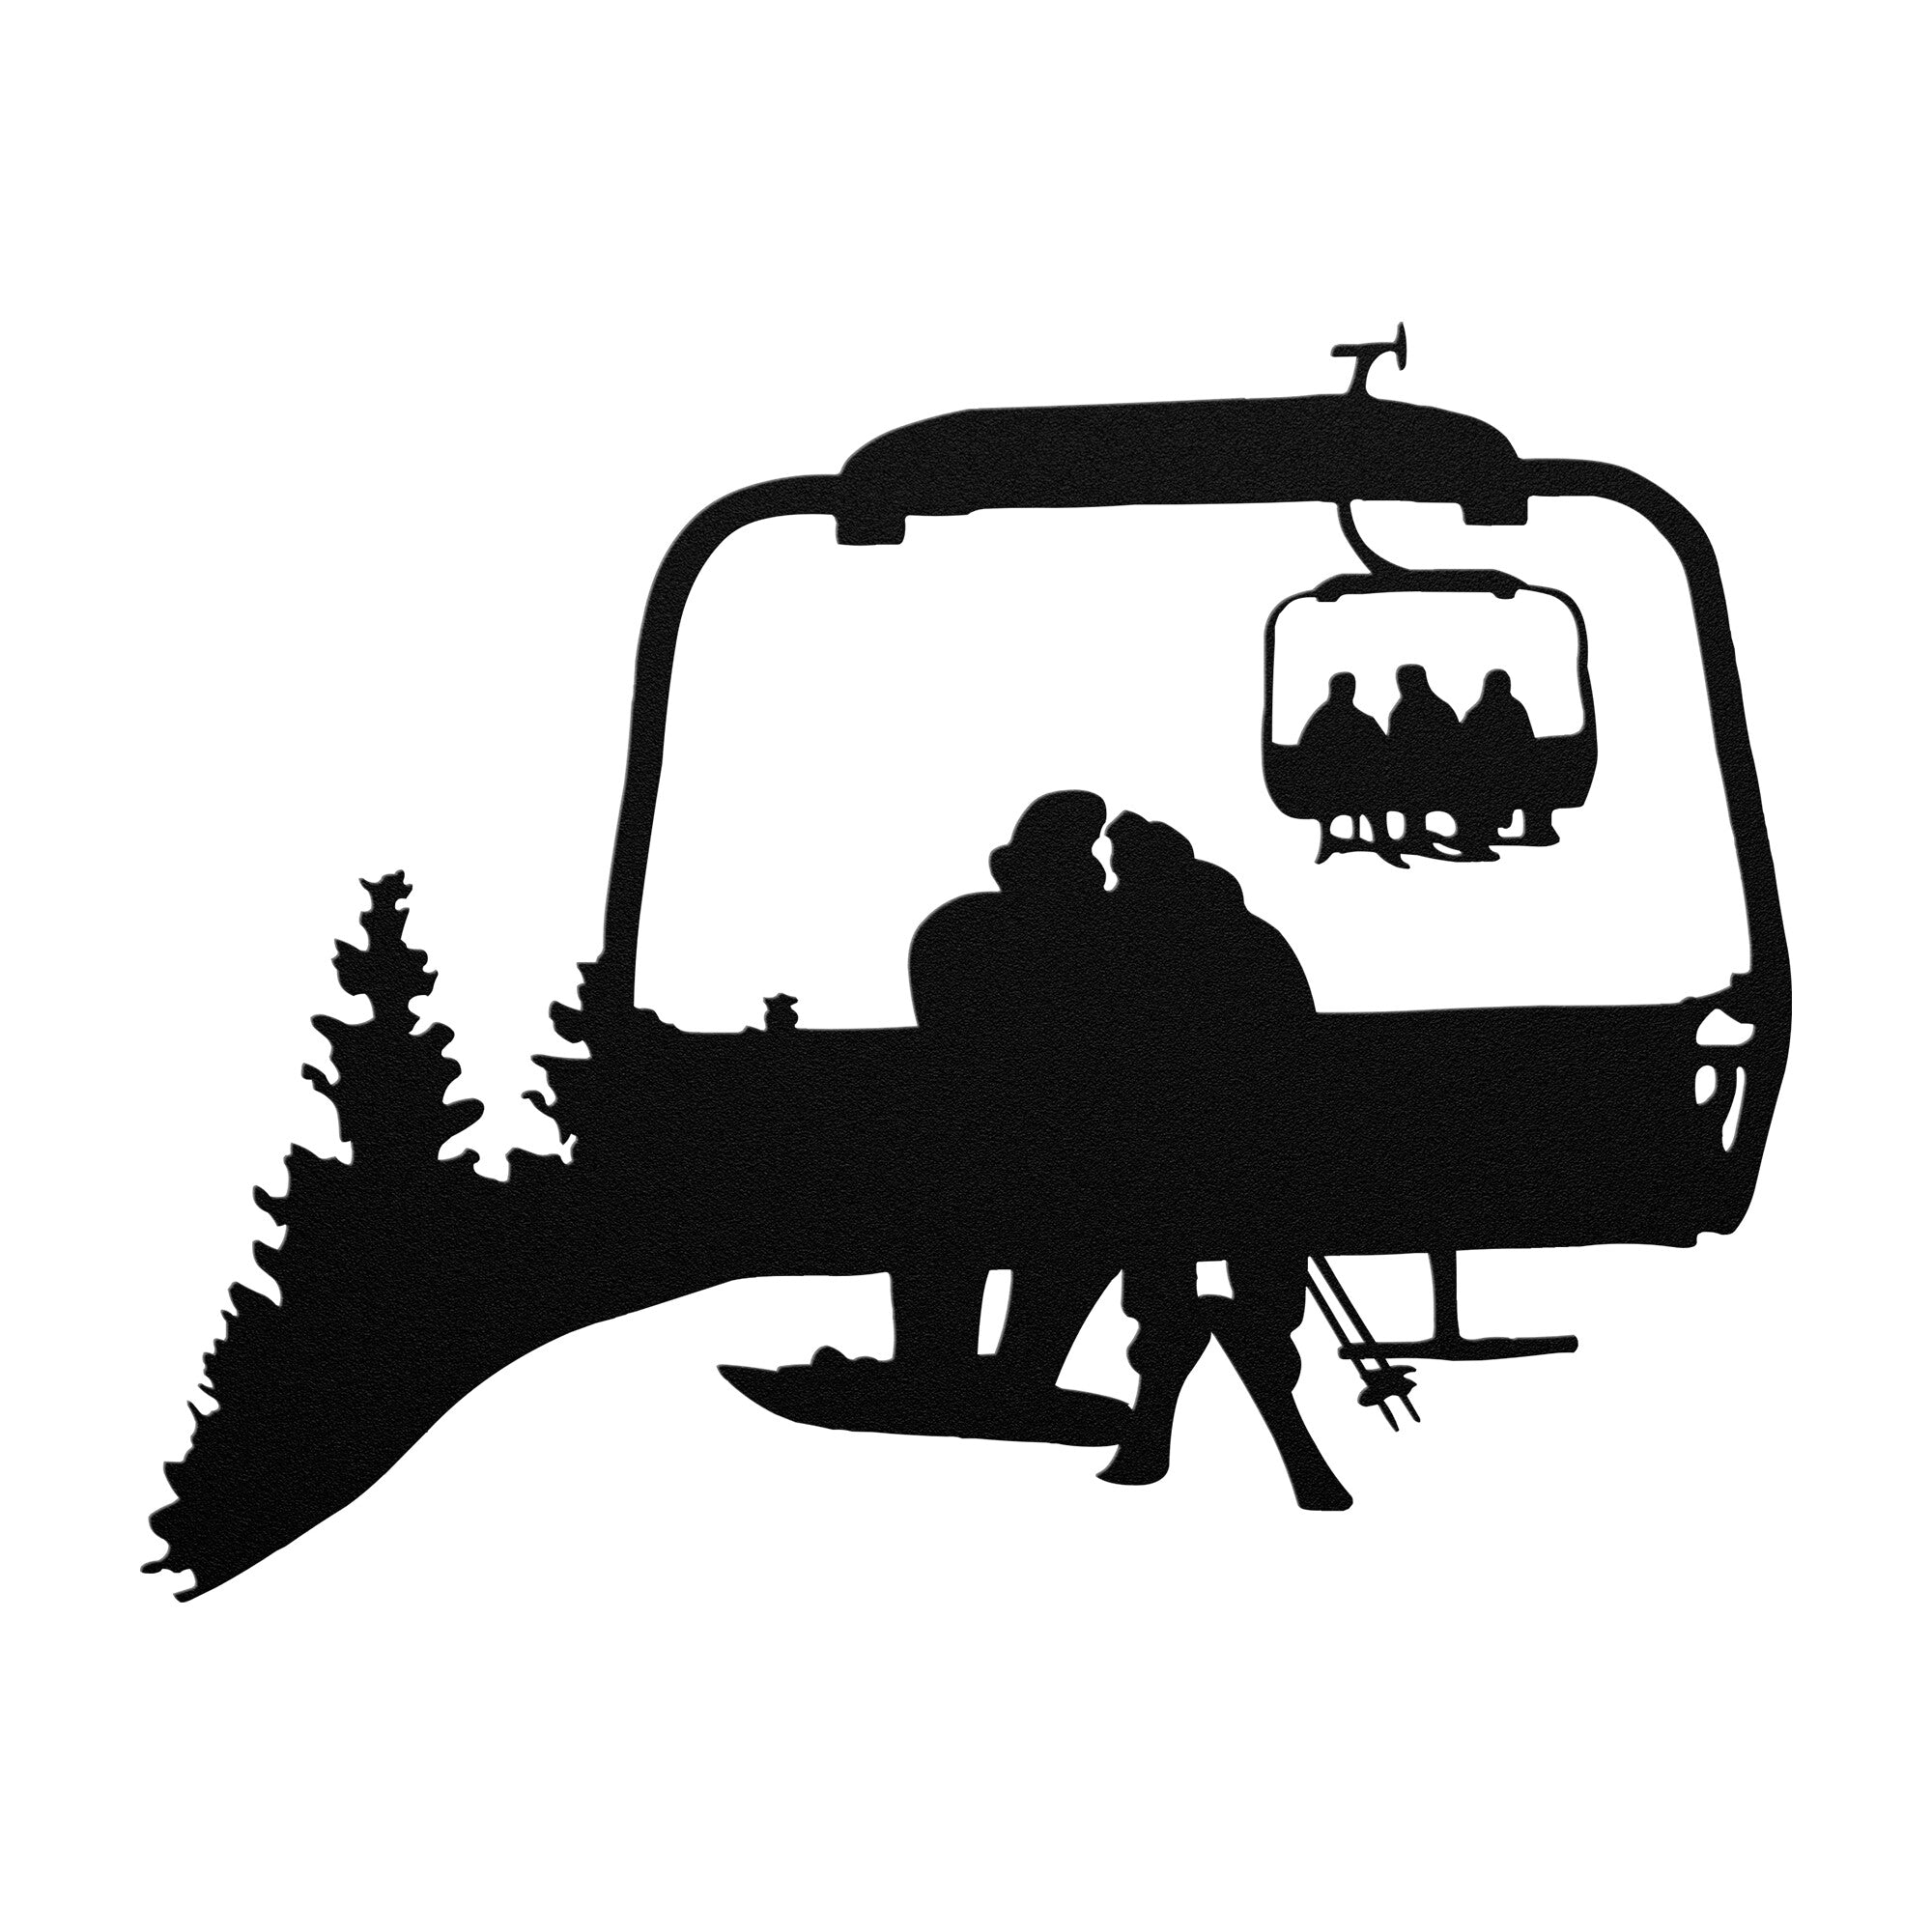 PERSONALIZED CHAIRLIFT SKI & SNOWBOARD COUPLE METAL WALL ART (🇺🇸 MADE IN THE USA)